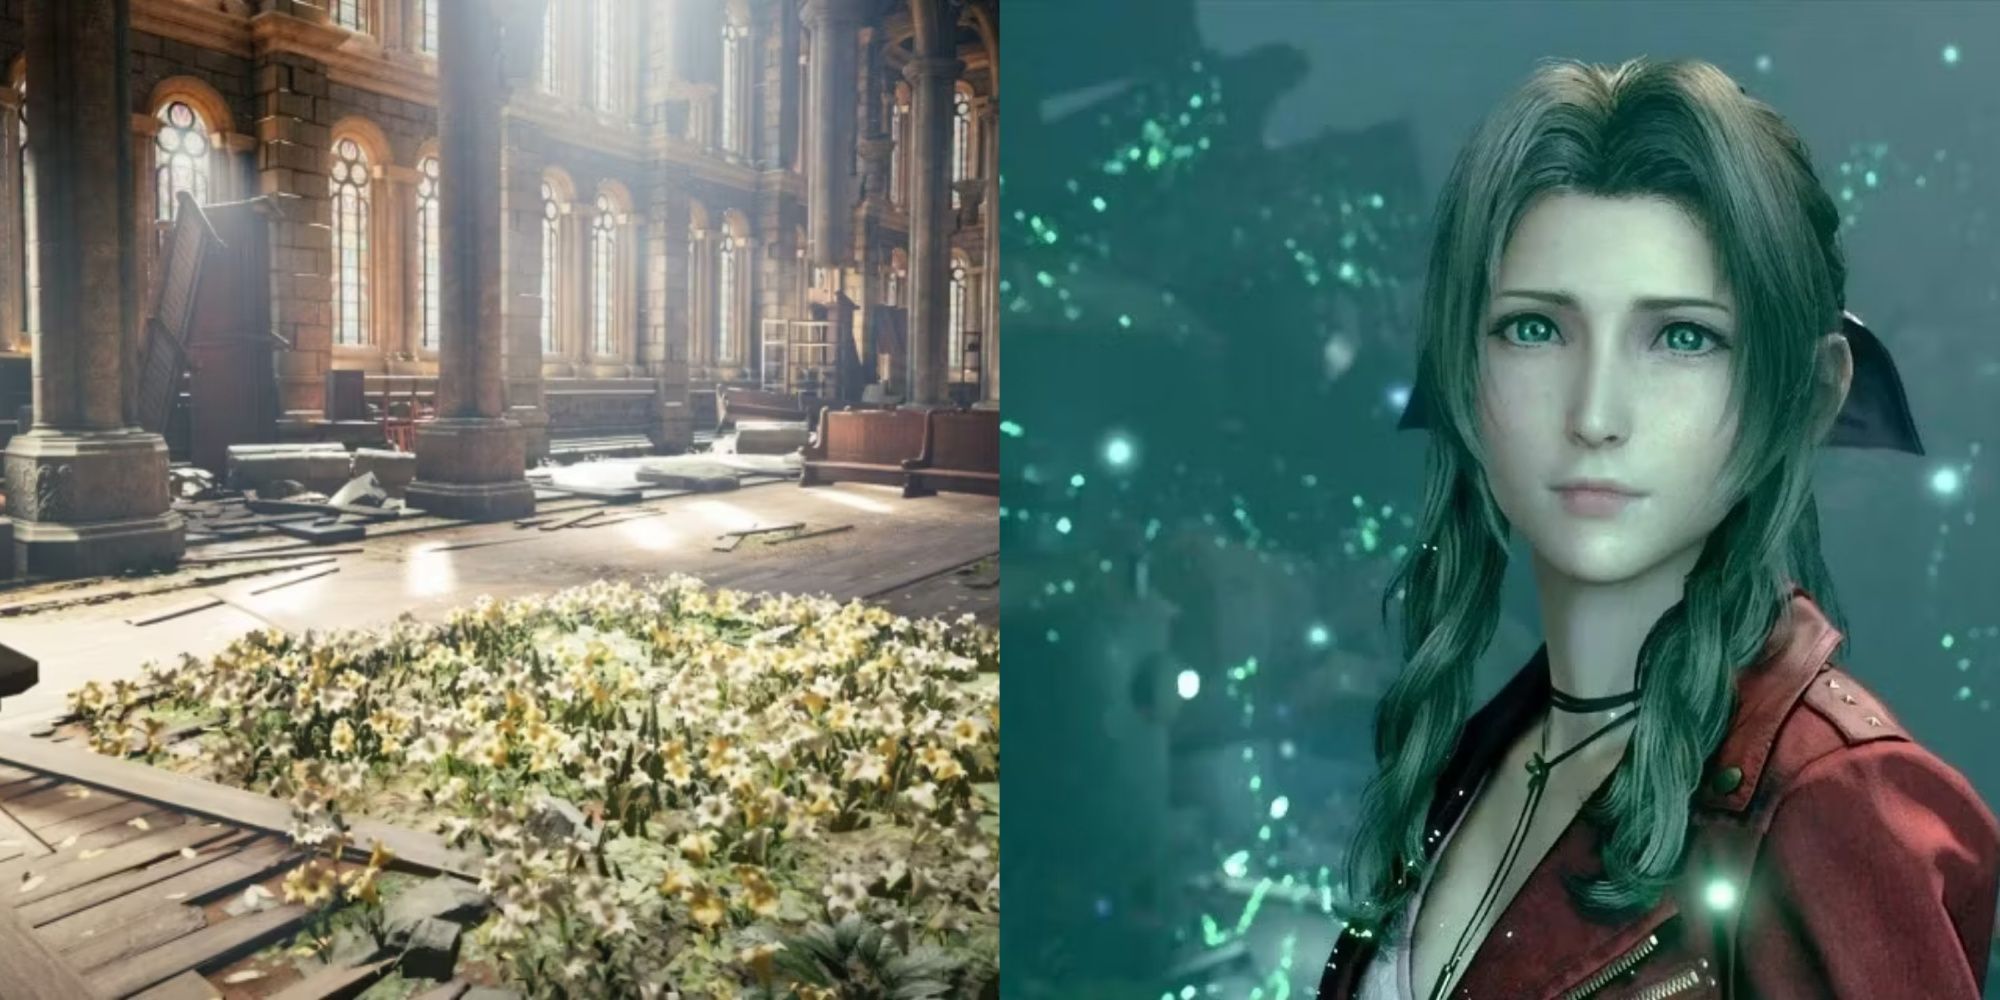 Final Fantasy 7 Church Interior and Flowerbed and Aerith surrounded by wisps of Mako, left to right